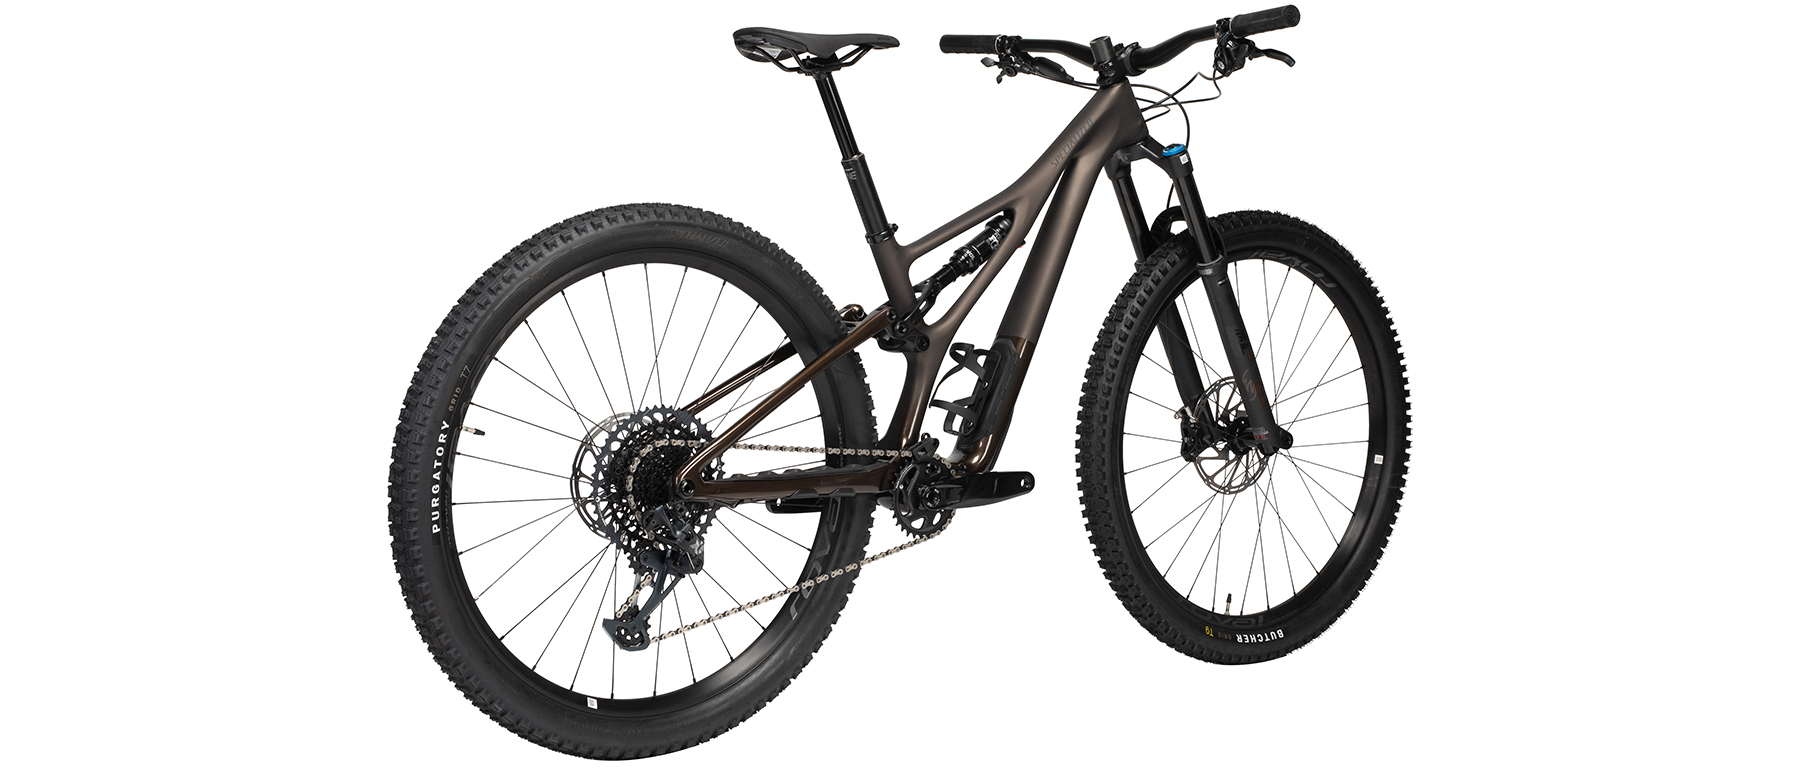 Specialized Stumpjumper Expert Bicycle 2022